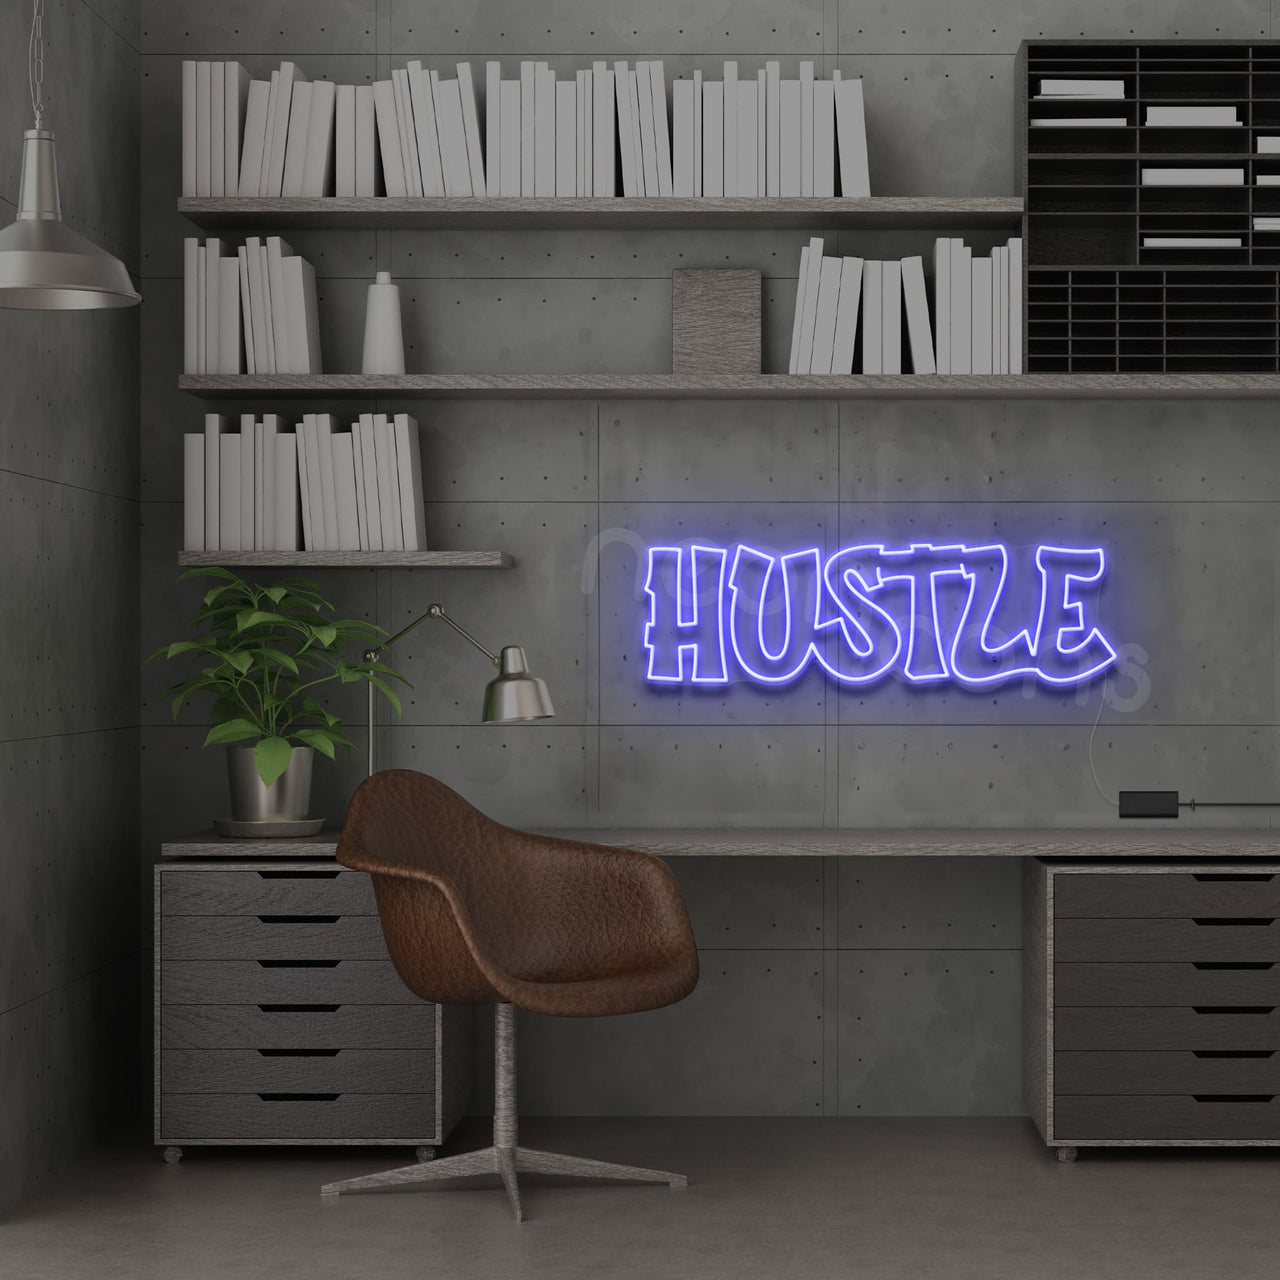 "Hustle" Neon Sign 60cm (2ft) / Blue / LED by Neon Icons